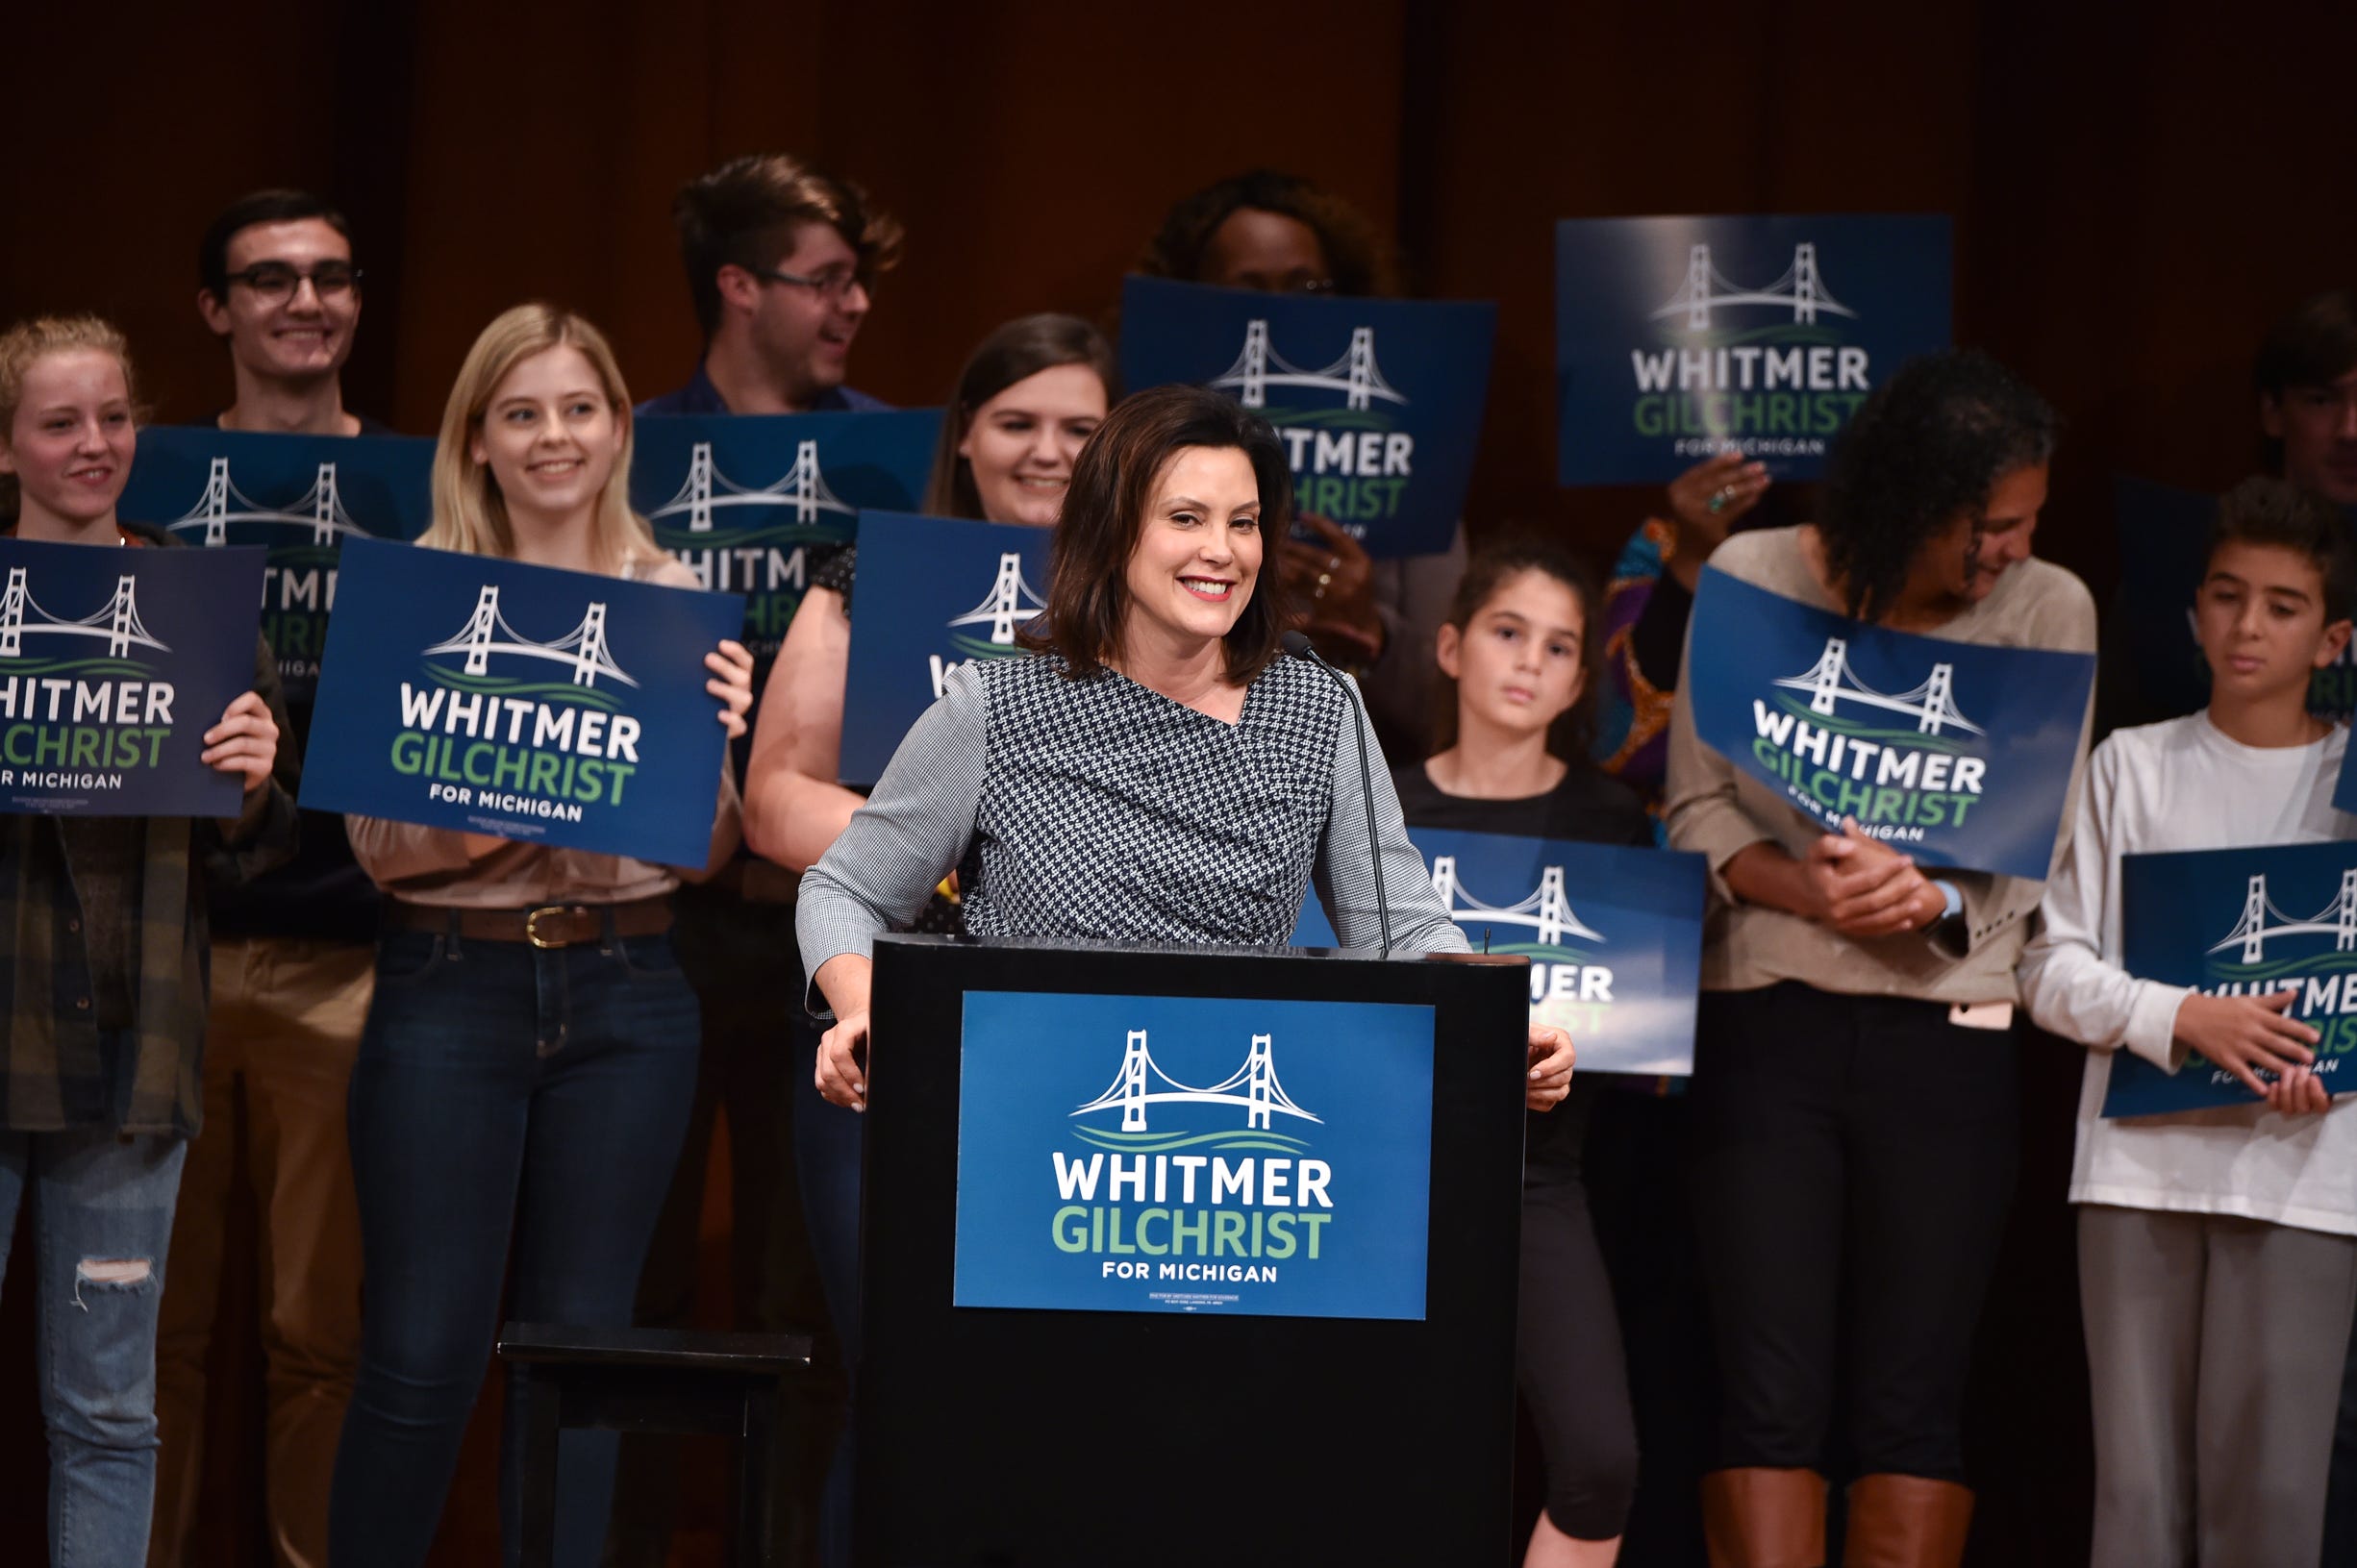 Michigan gubernatorial candidate Gretchen Whitmer smiles at the applause of the crowd in Rackham Auditorium in Ann Arbor.